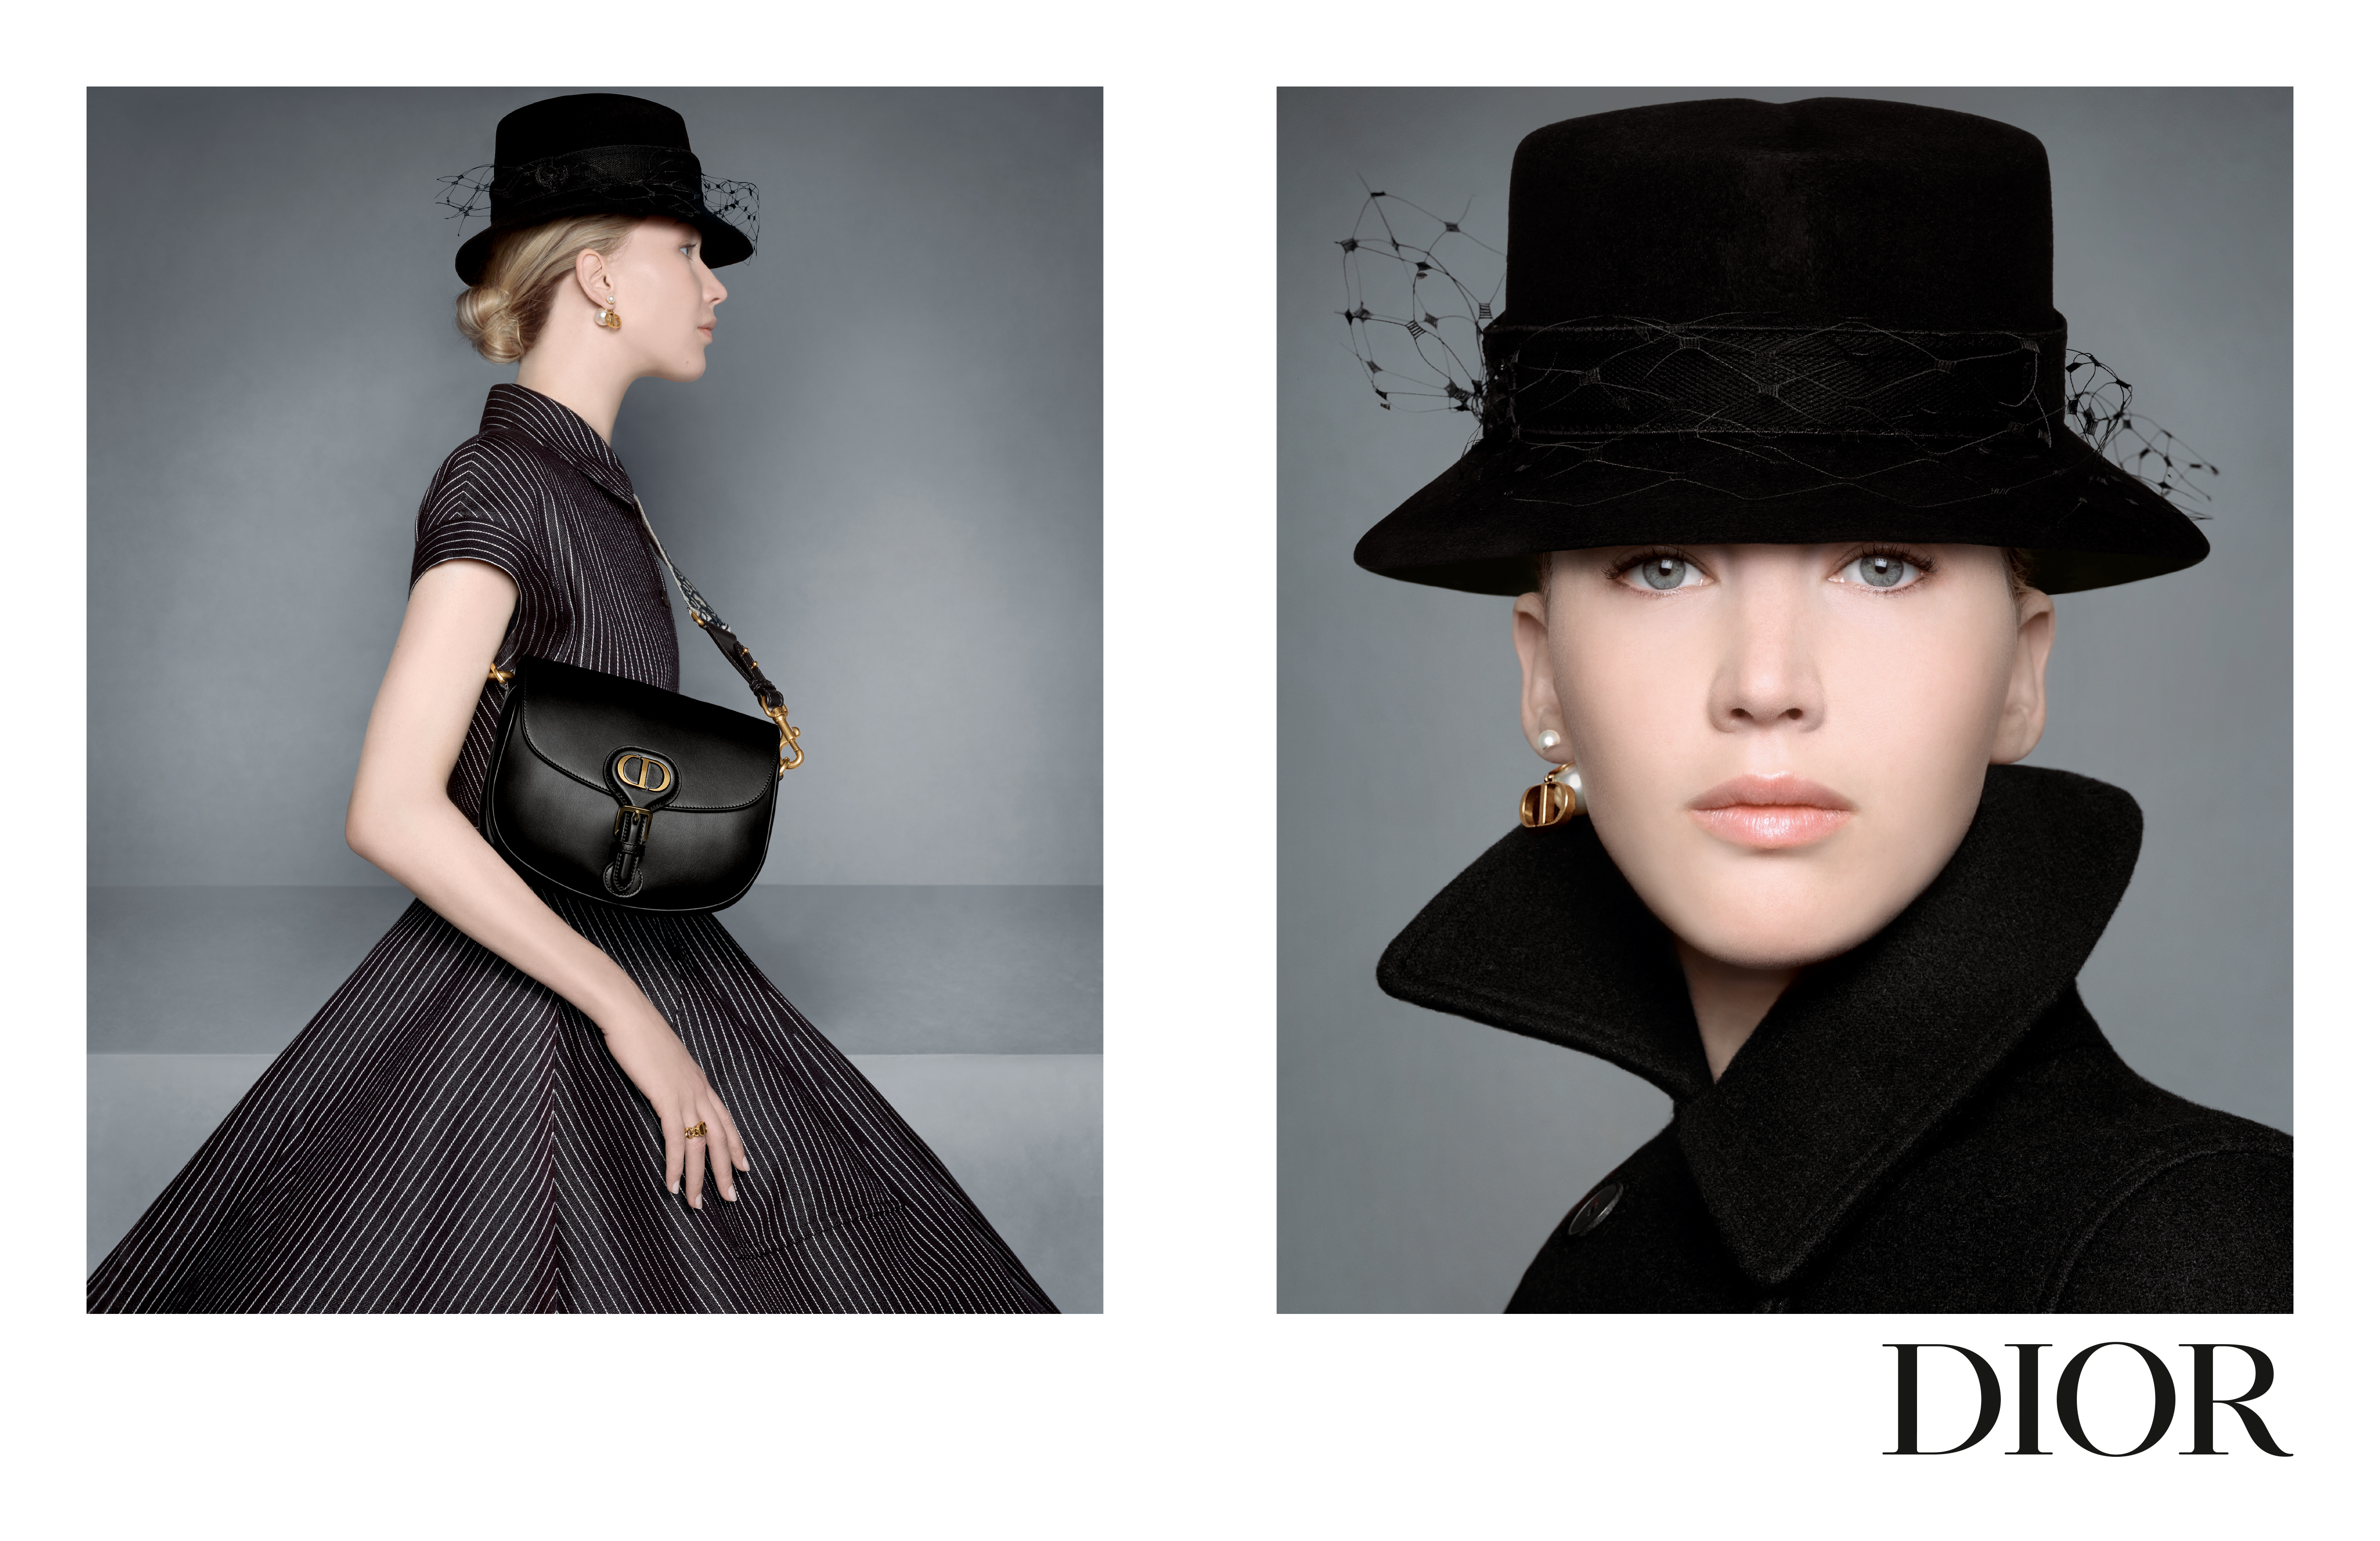 Jennifer Lawrence in the Dior pre-fall campaign. Photographer by Brigitte Niedermair/, Fashion Isabelle Kountoure / Courtesy of Dior